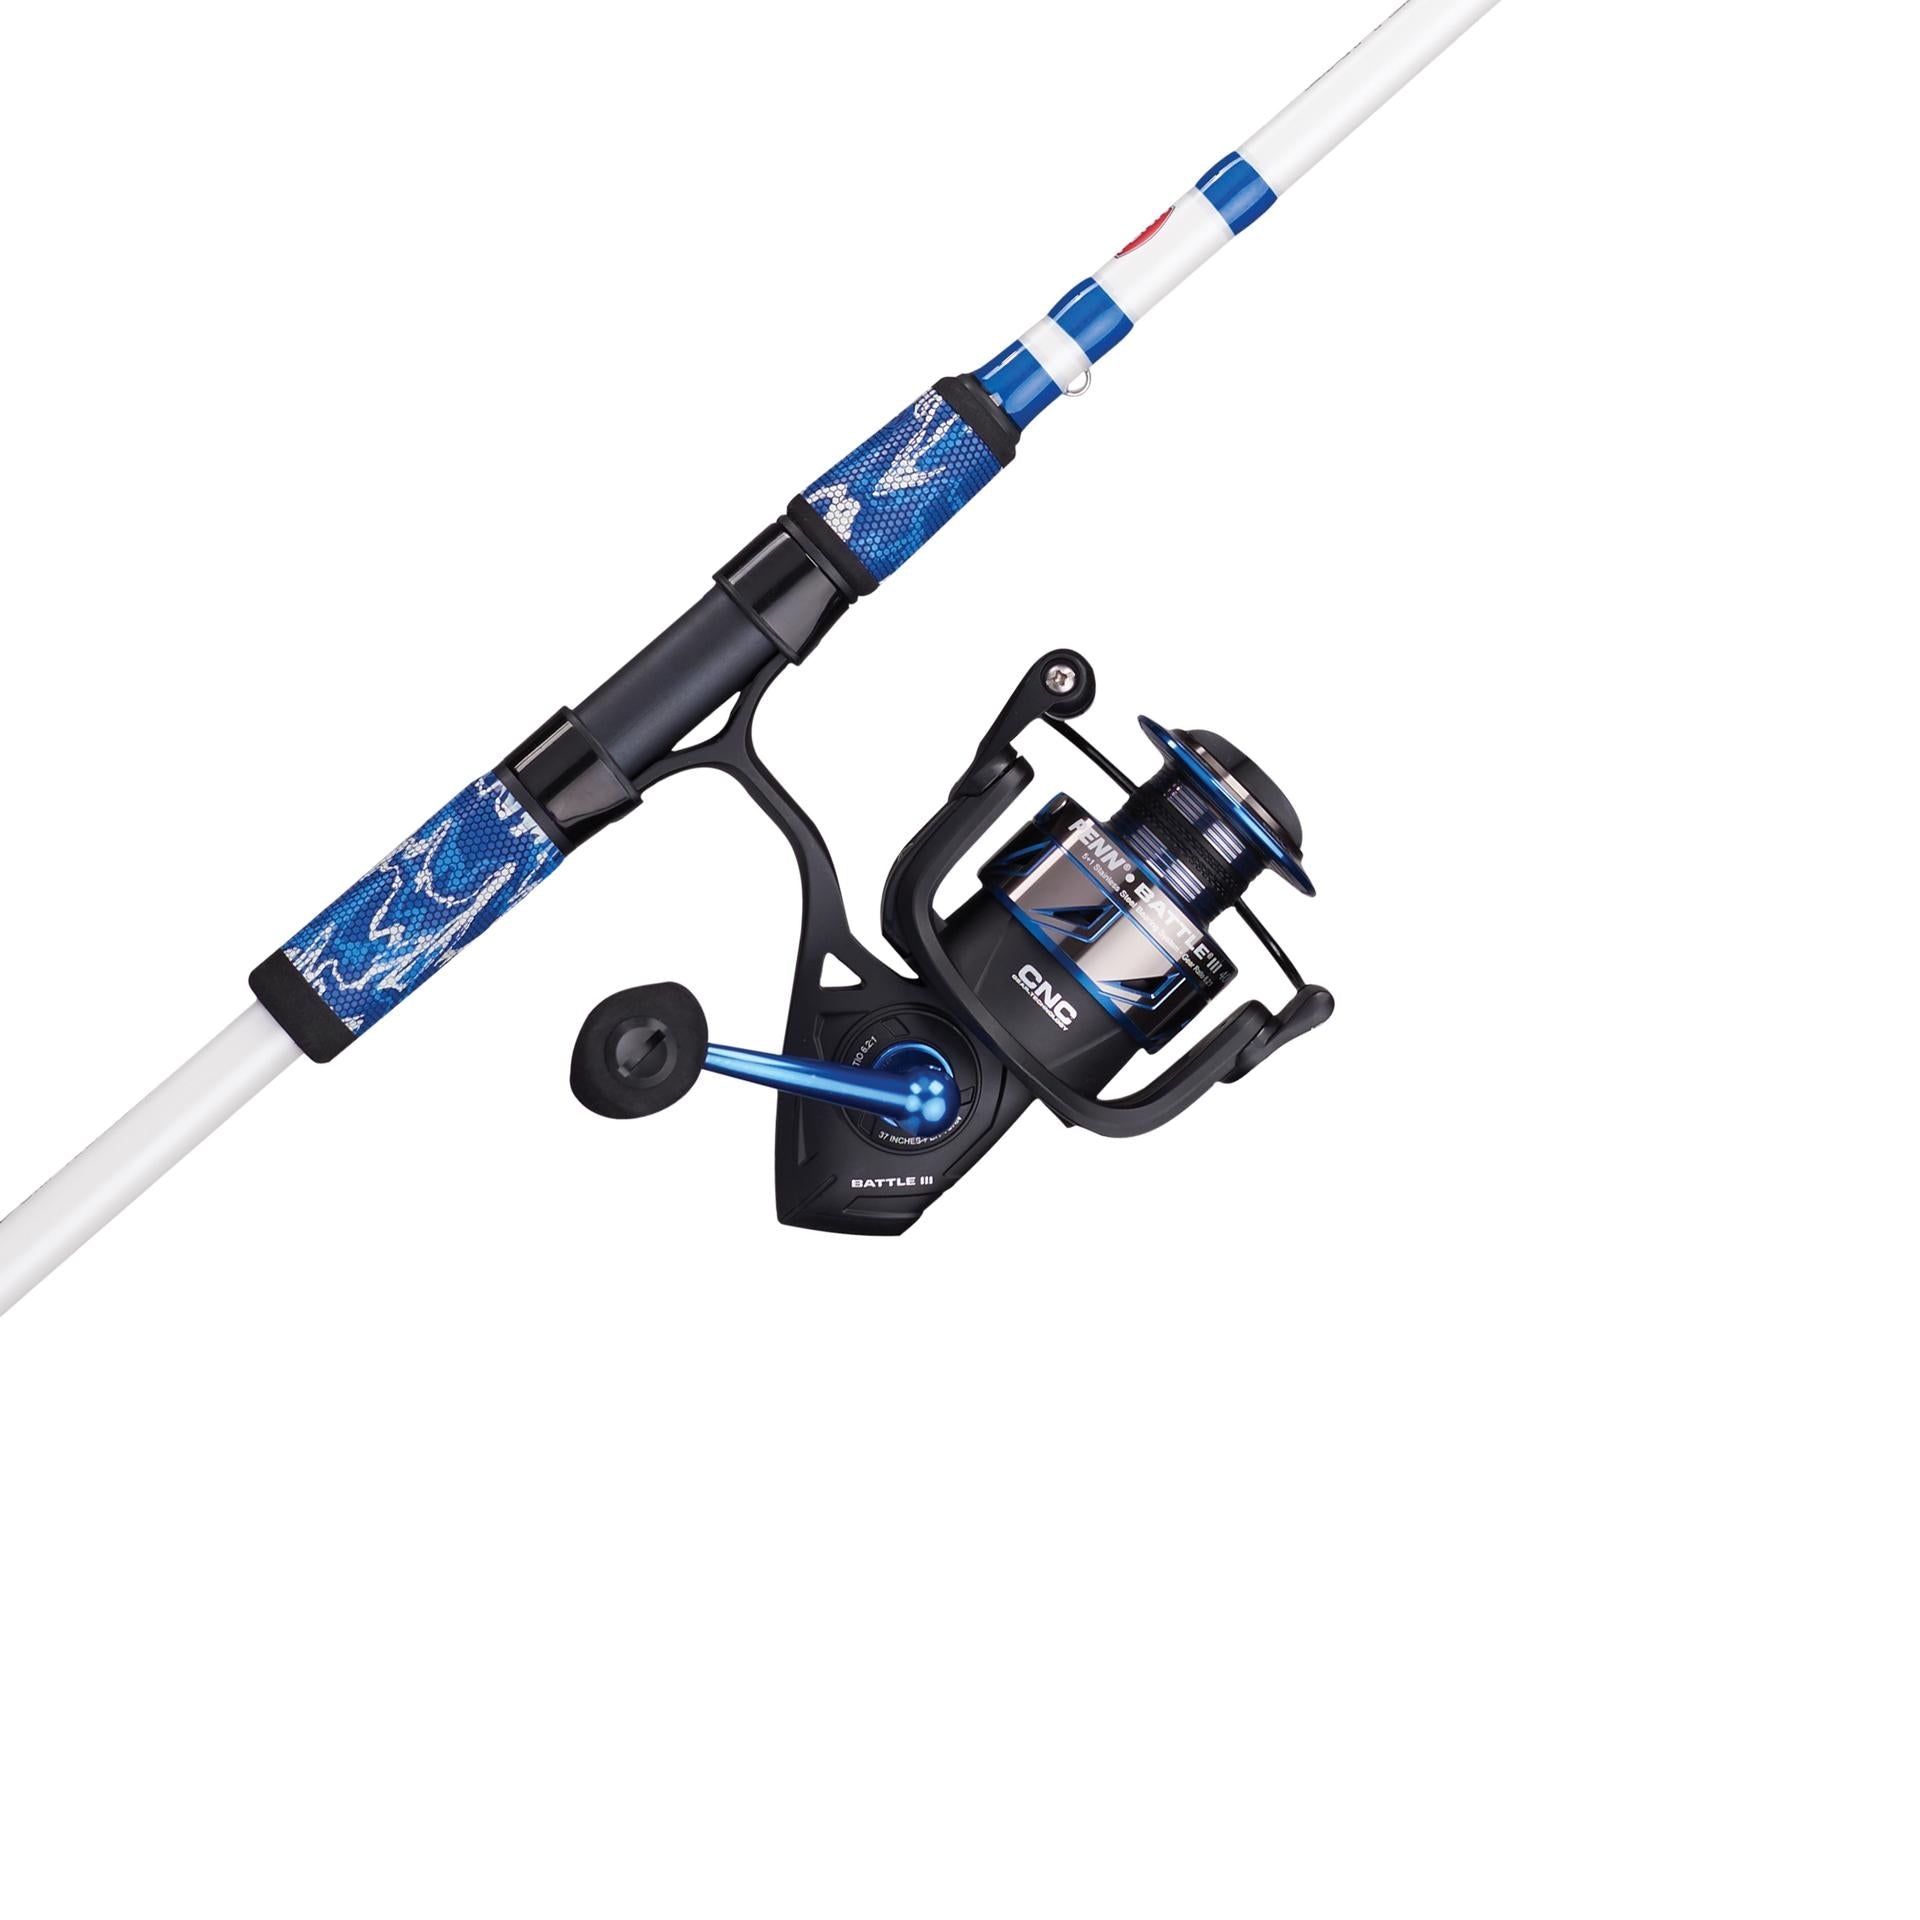 This is one good rod and reel combo.